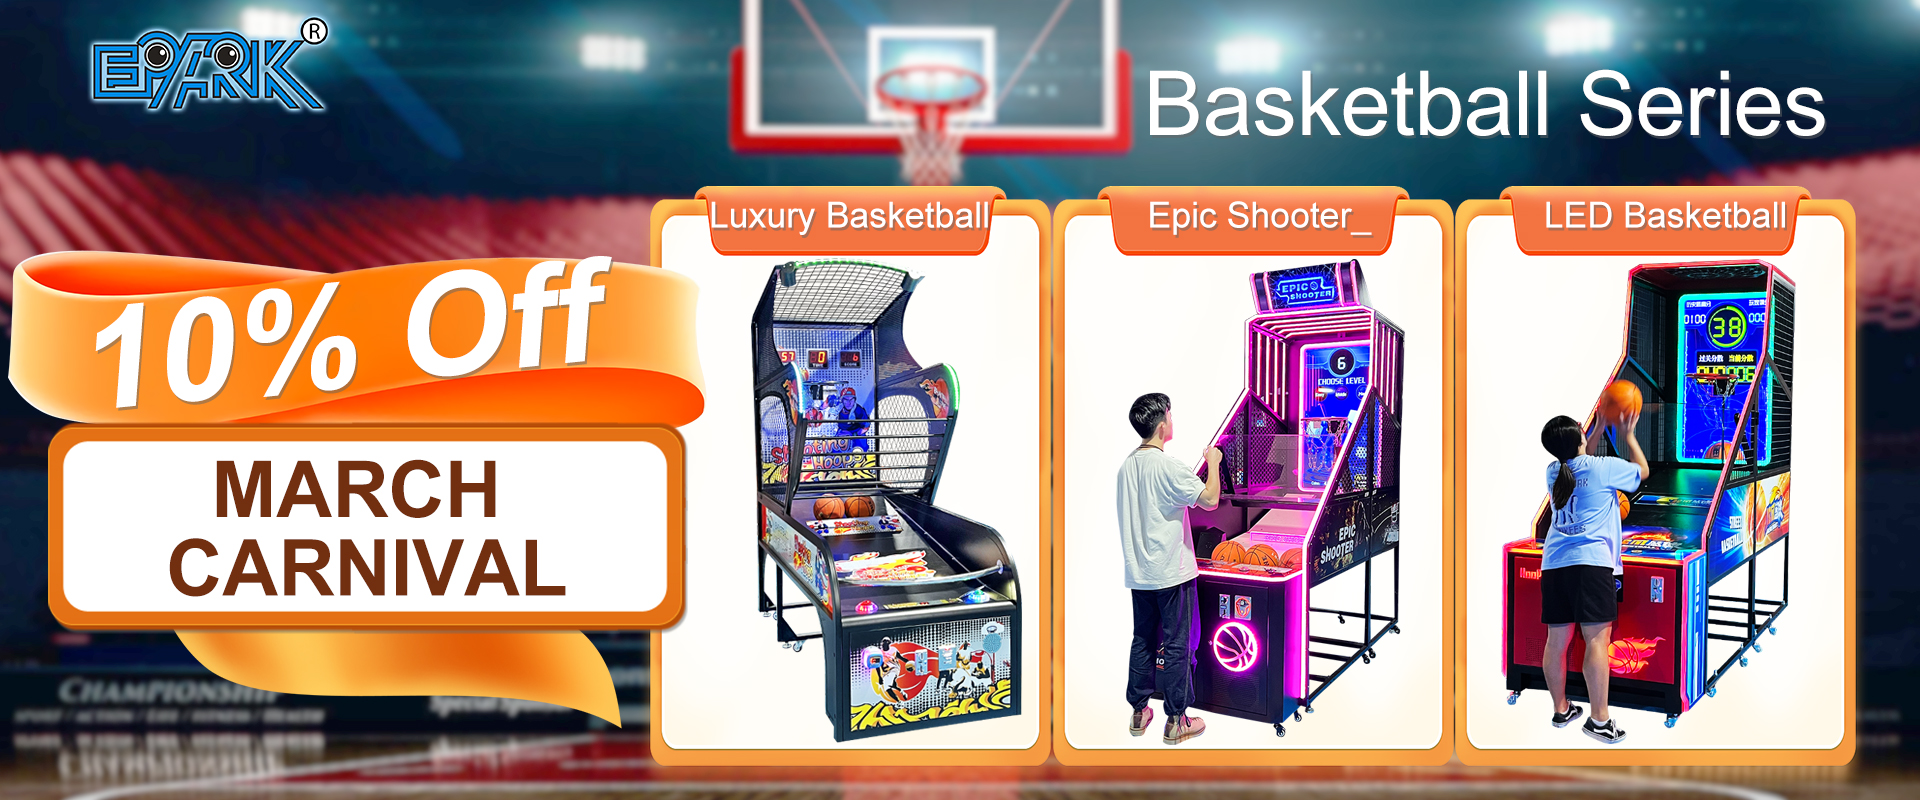 How To Get A High Score In The Basketball Game Machine Game?